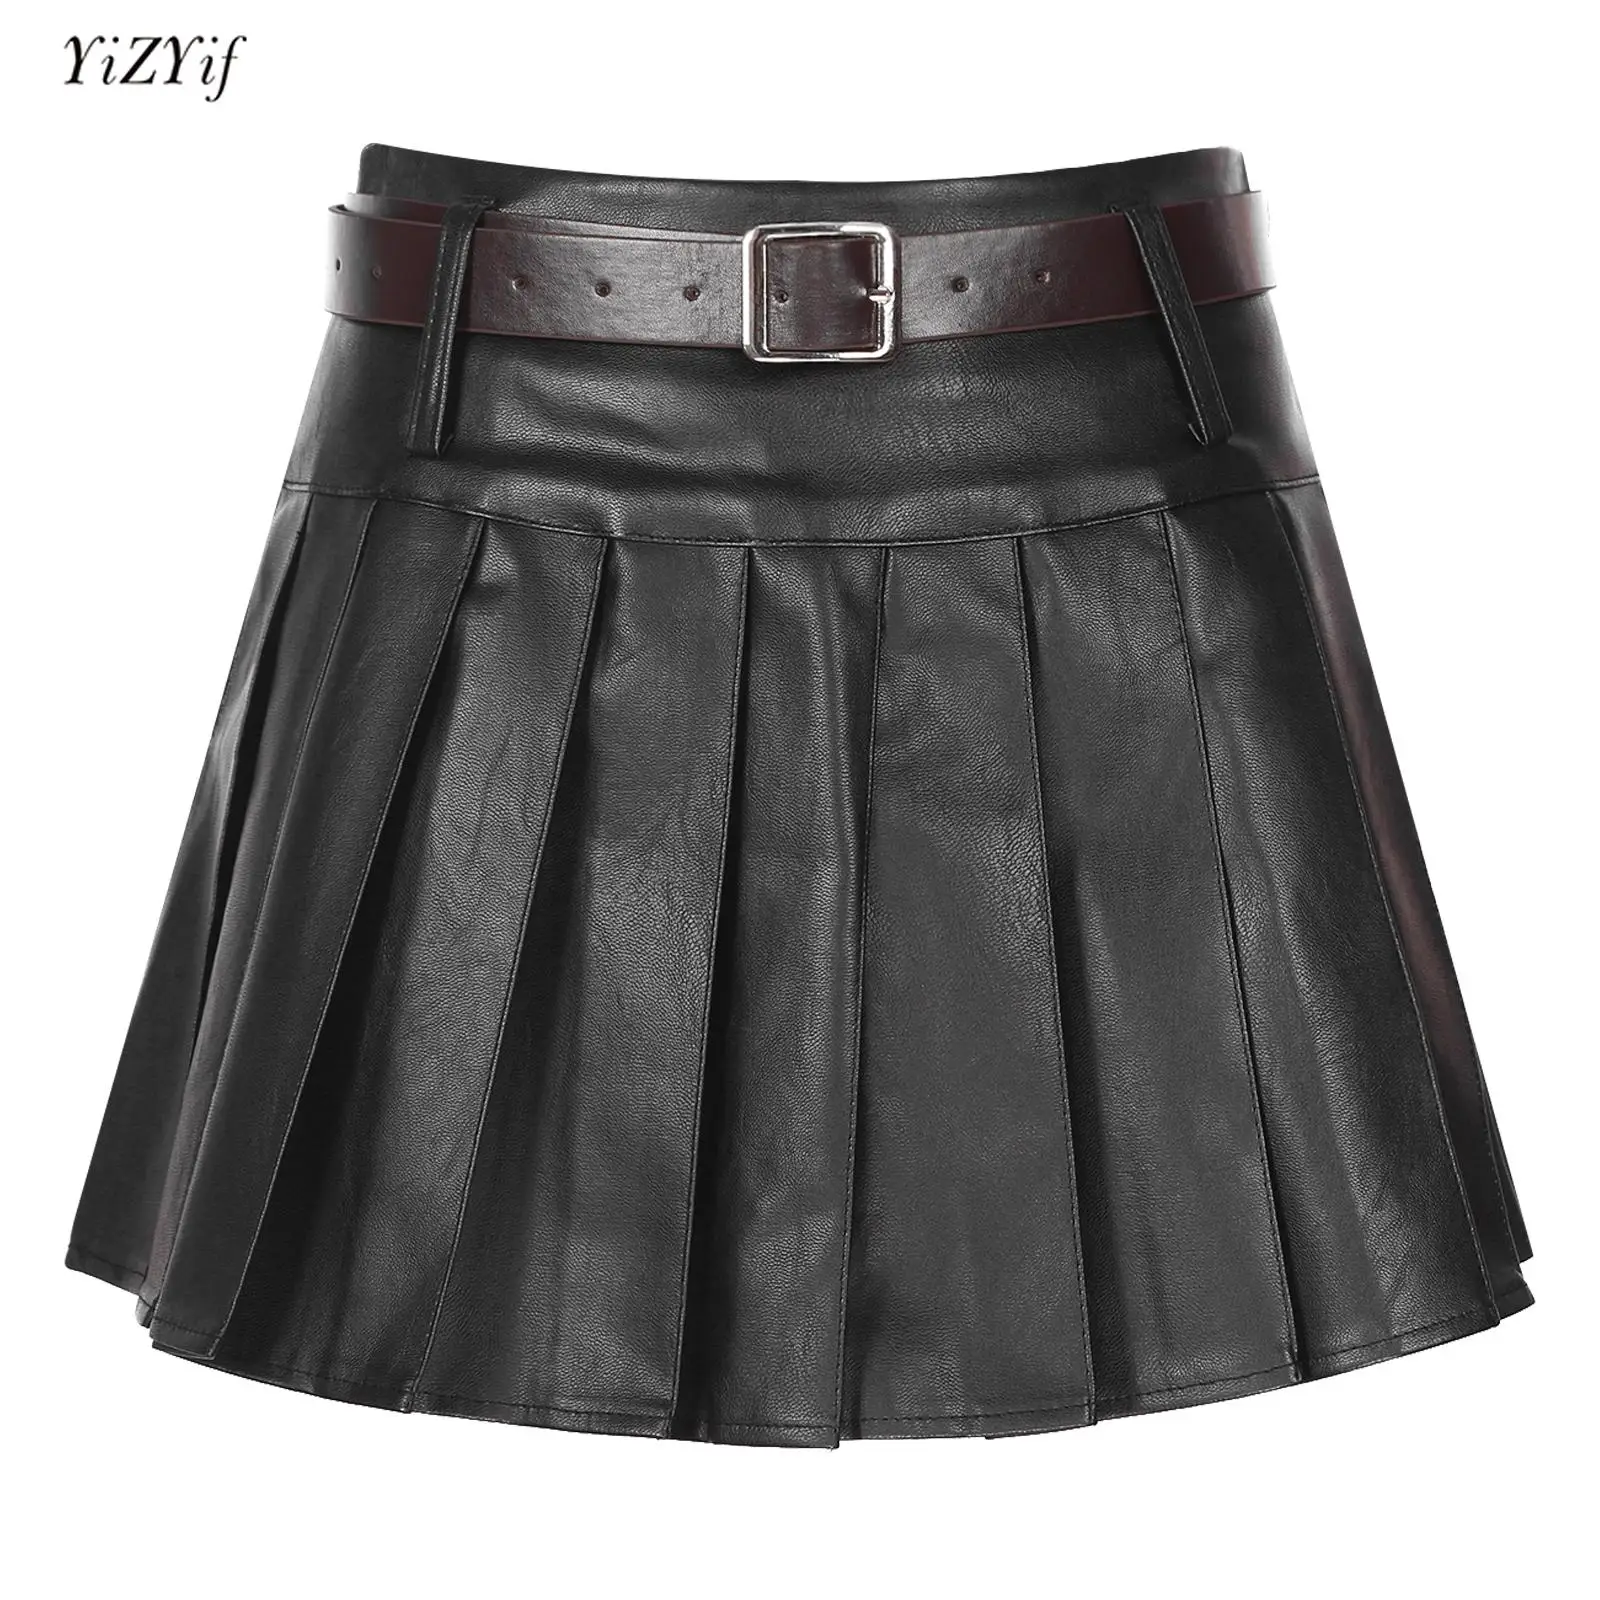 Womens Faux Leather Pleated Skirt Fashion Clubwear High Waist Built-in Shorts Skirts with Adjustable Belt Party Street Dancewear solar street lights sensor outdoor wall light with 168 leds surfaces large lighting range solar powered outdoor light for yard